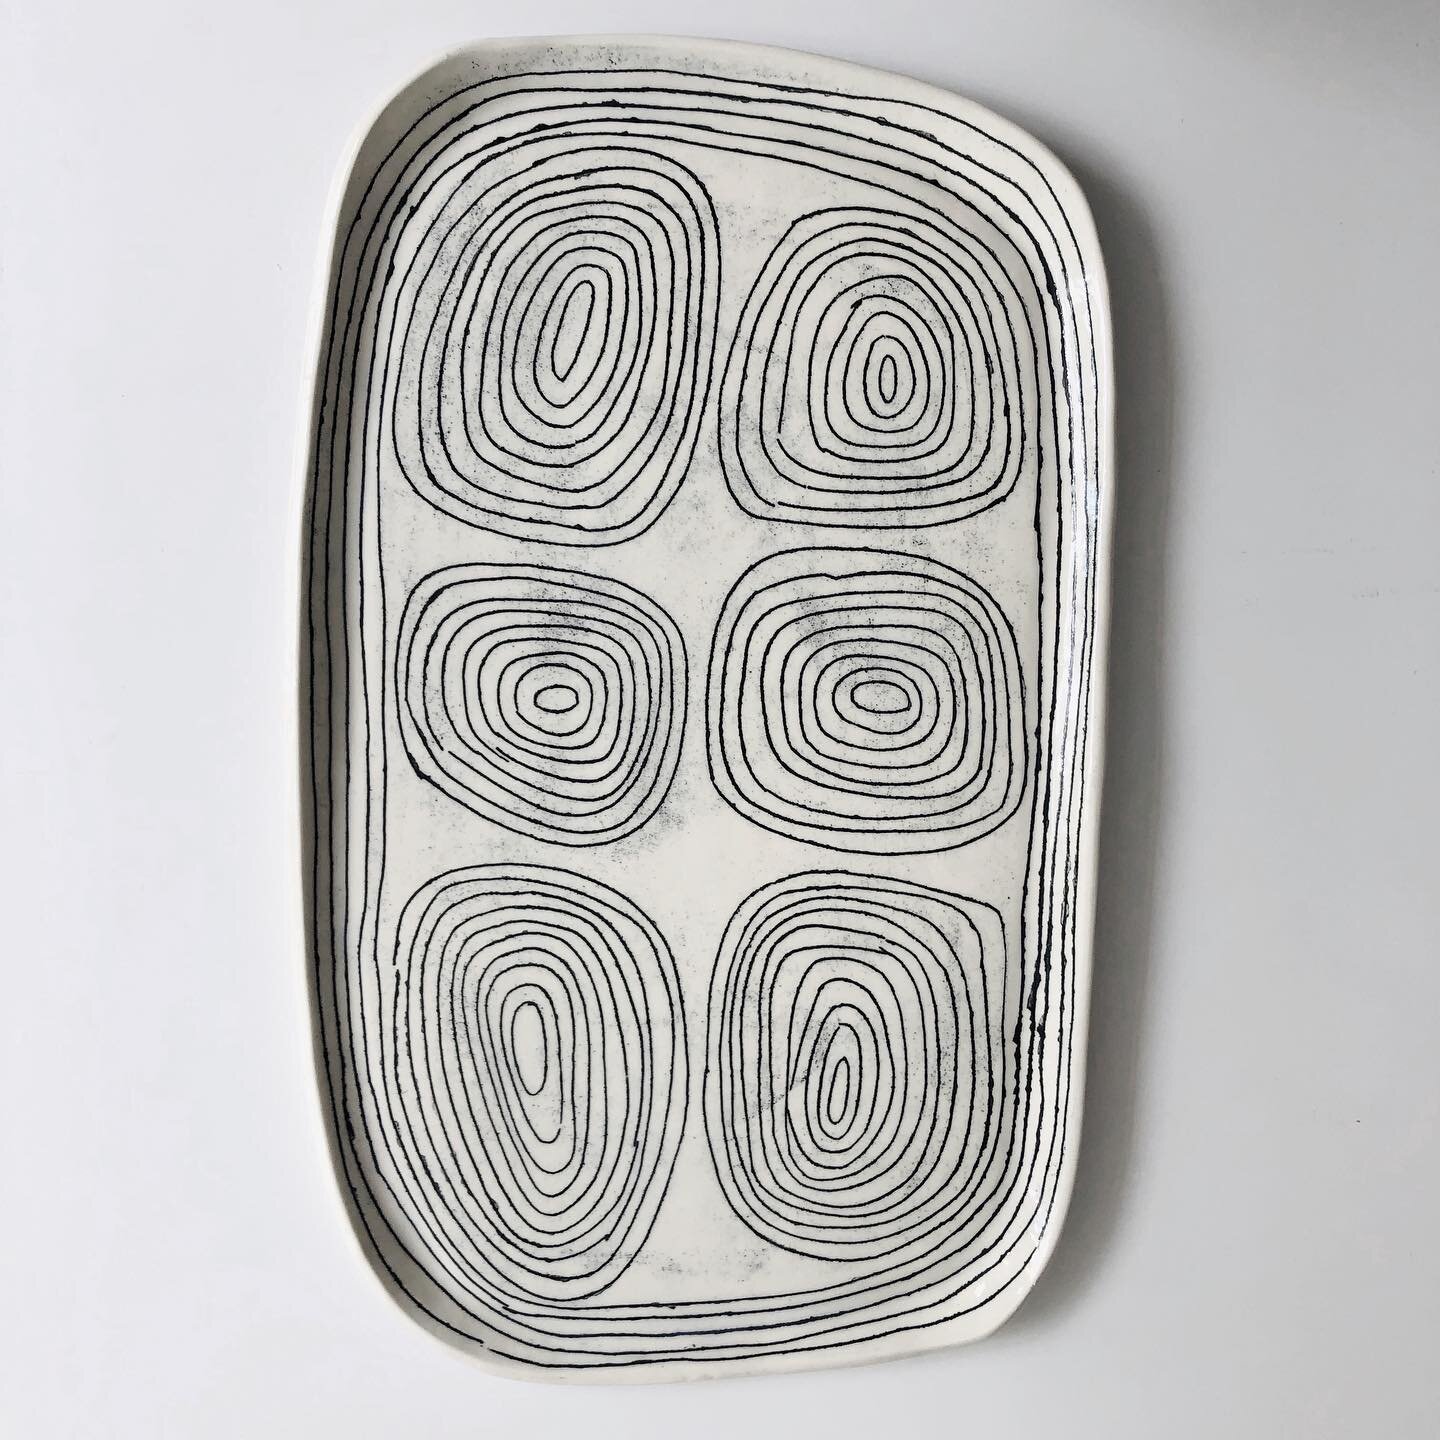 black and white platters in the webshop now. link in profile.